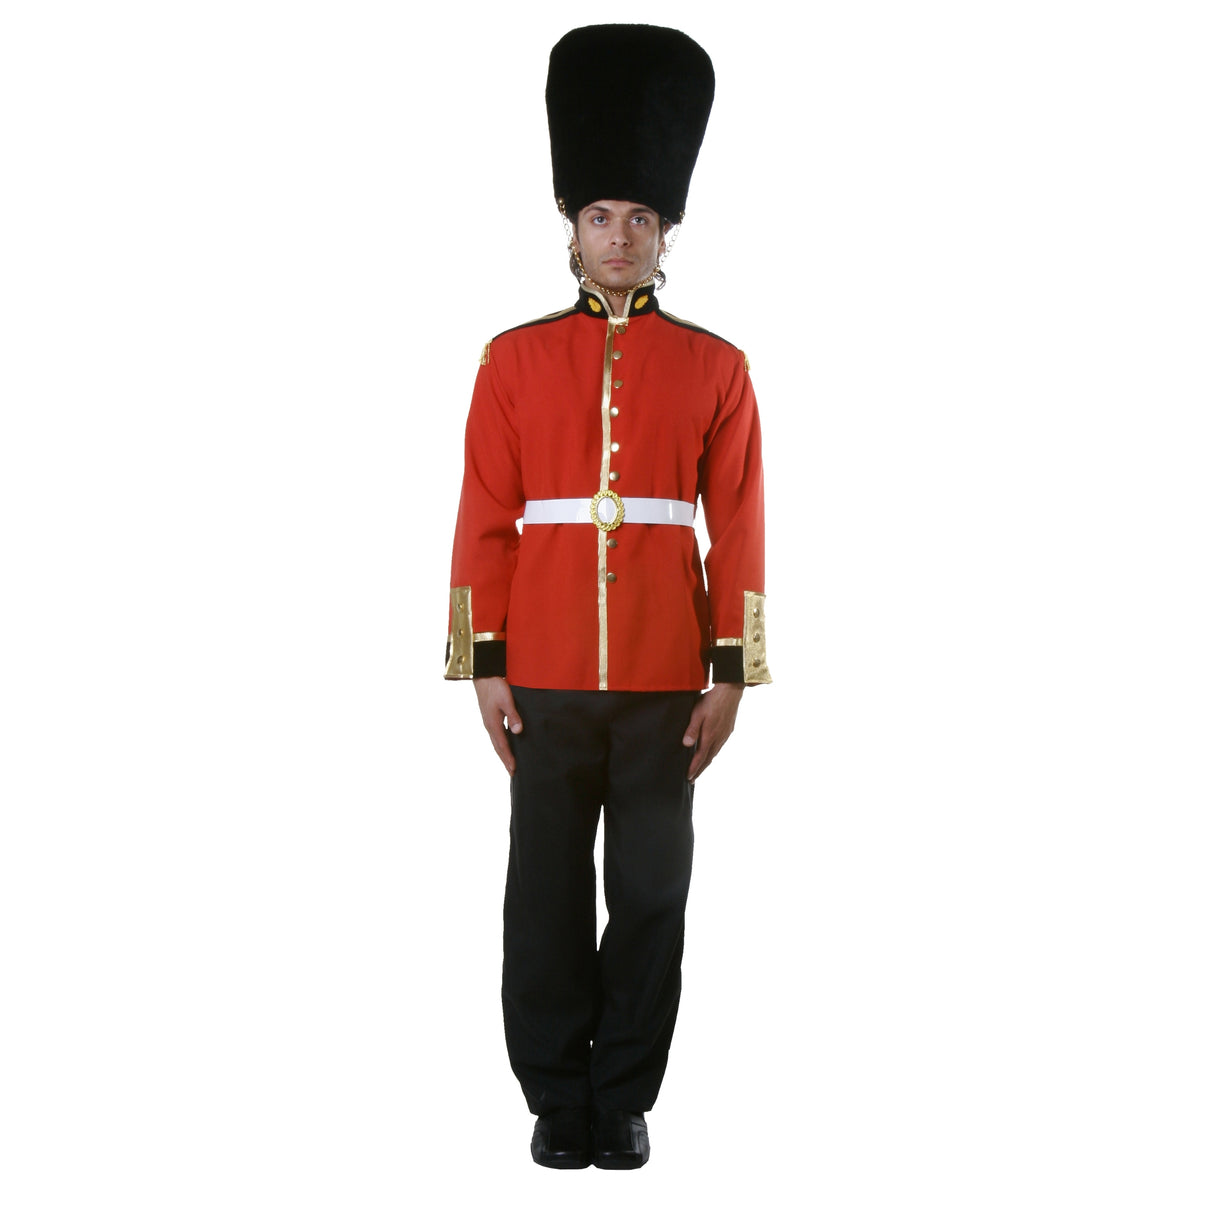 Royal Guard Soldier - Adults